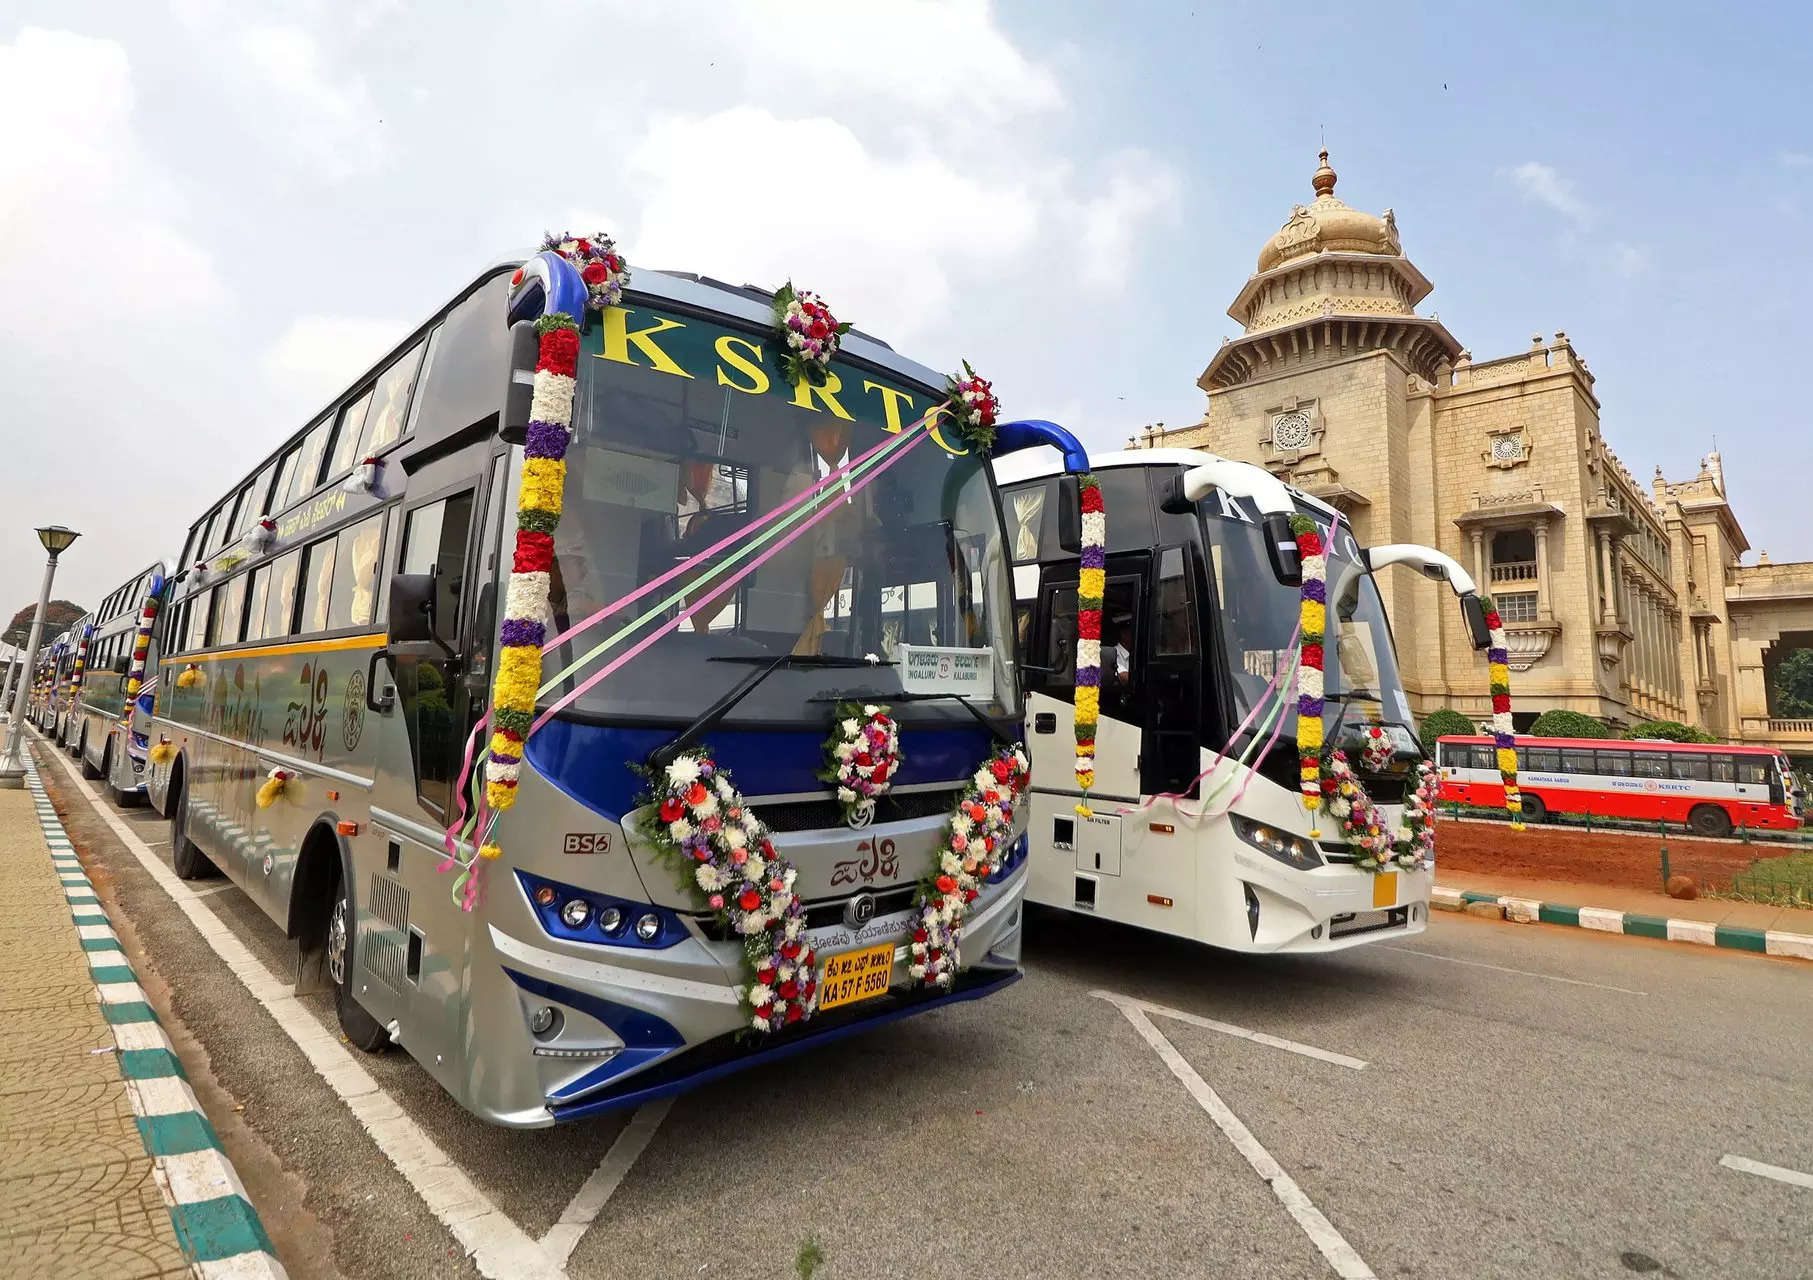 <p>According to a statement issued by the CM's office, the Chief Minister said INR 500 crore has been provided in the state budget for acquiring new buses, and therefore ordered that the purchase process be completed soon.</p>